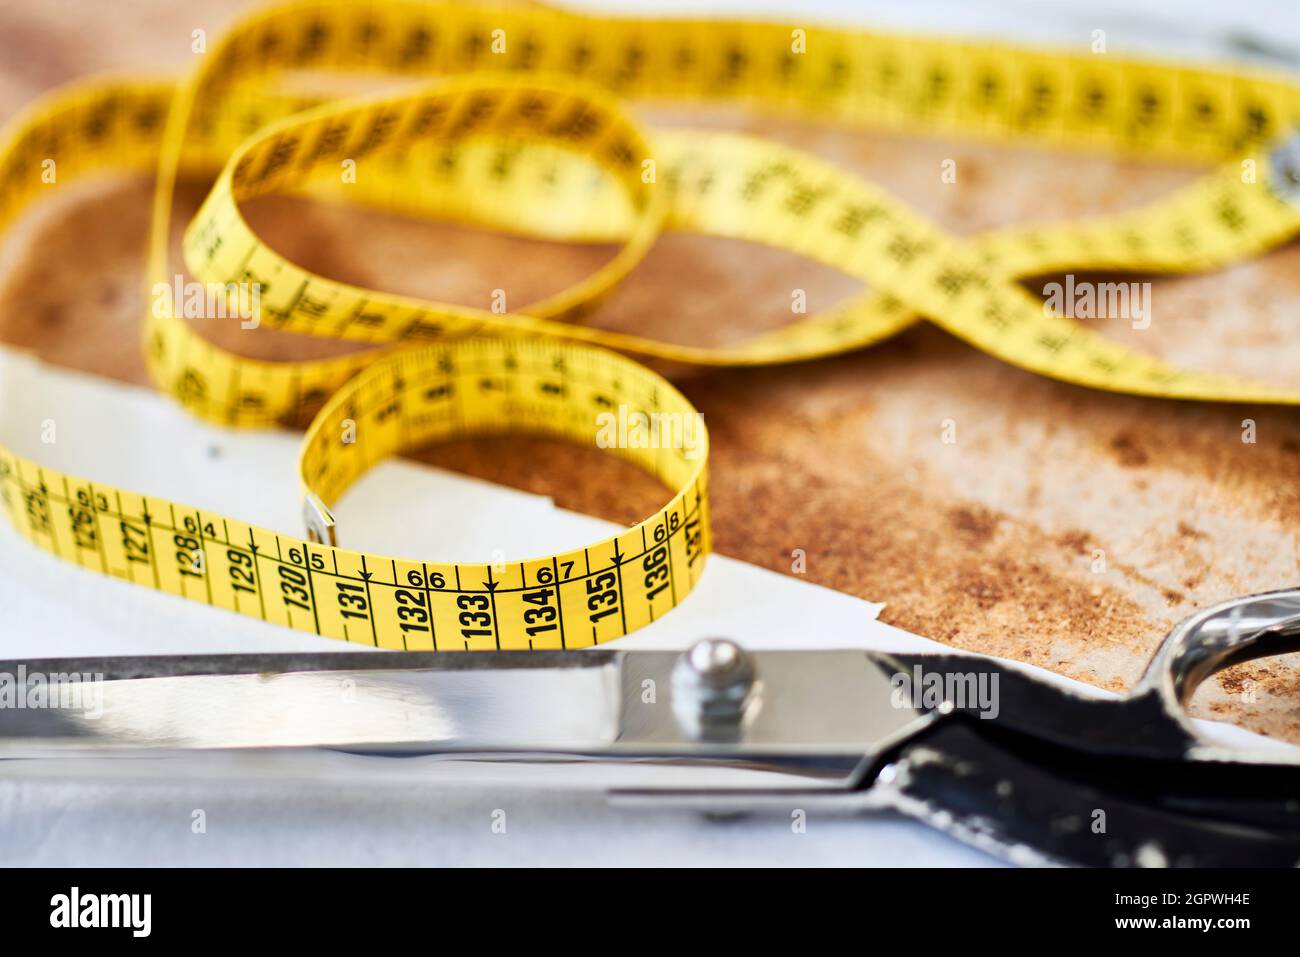 close-up of a yellow tailor's tape measure Stock Photo